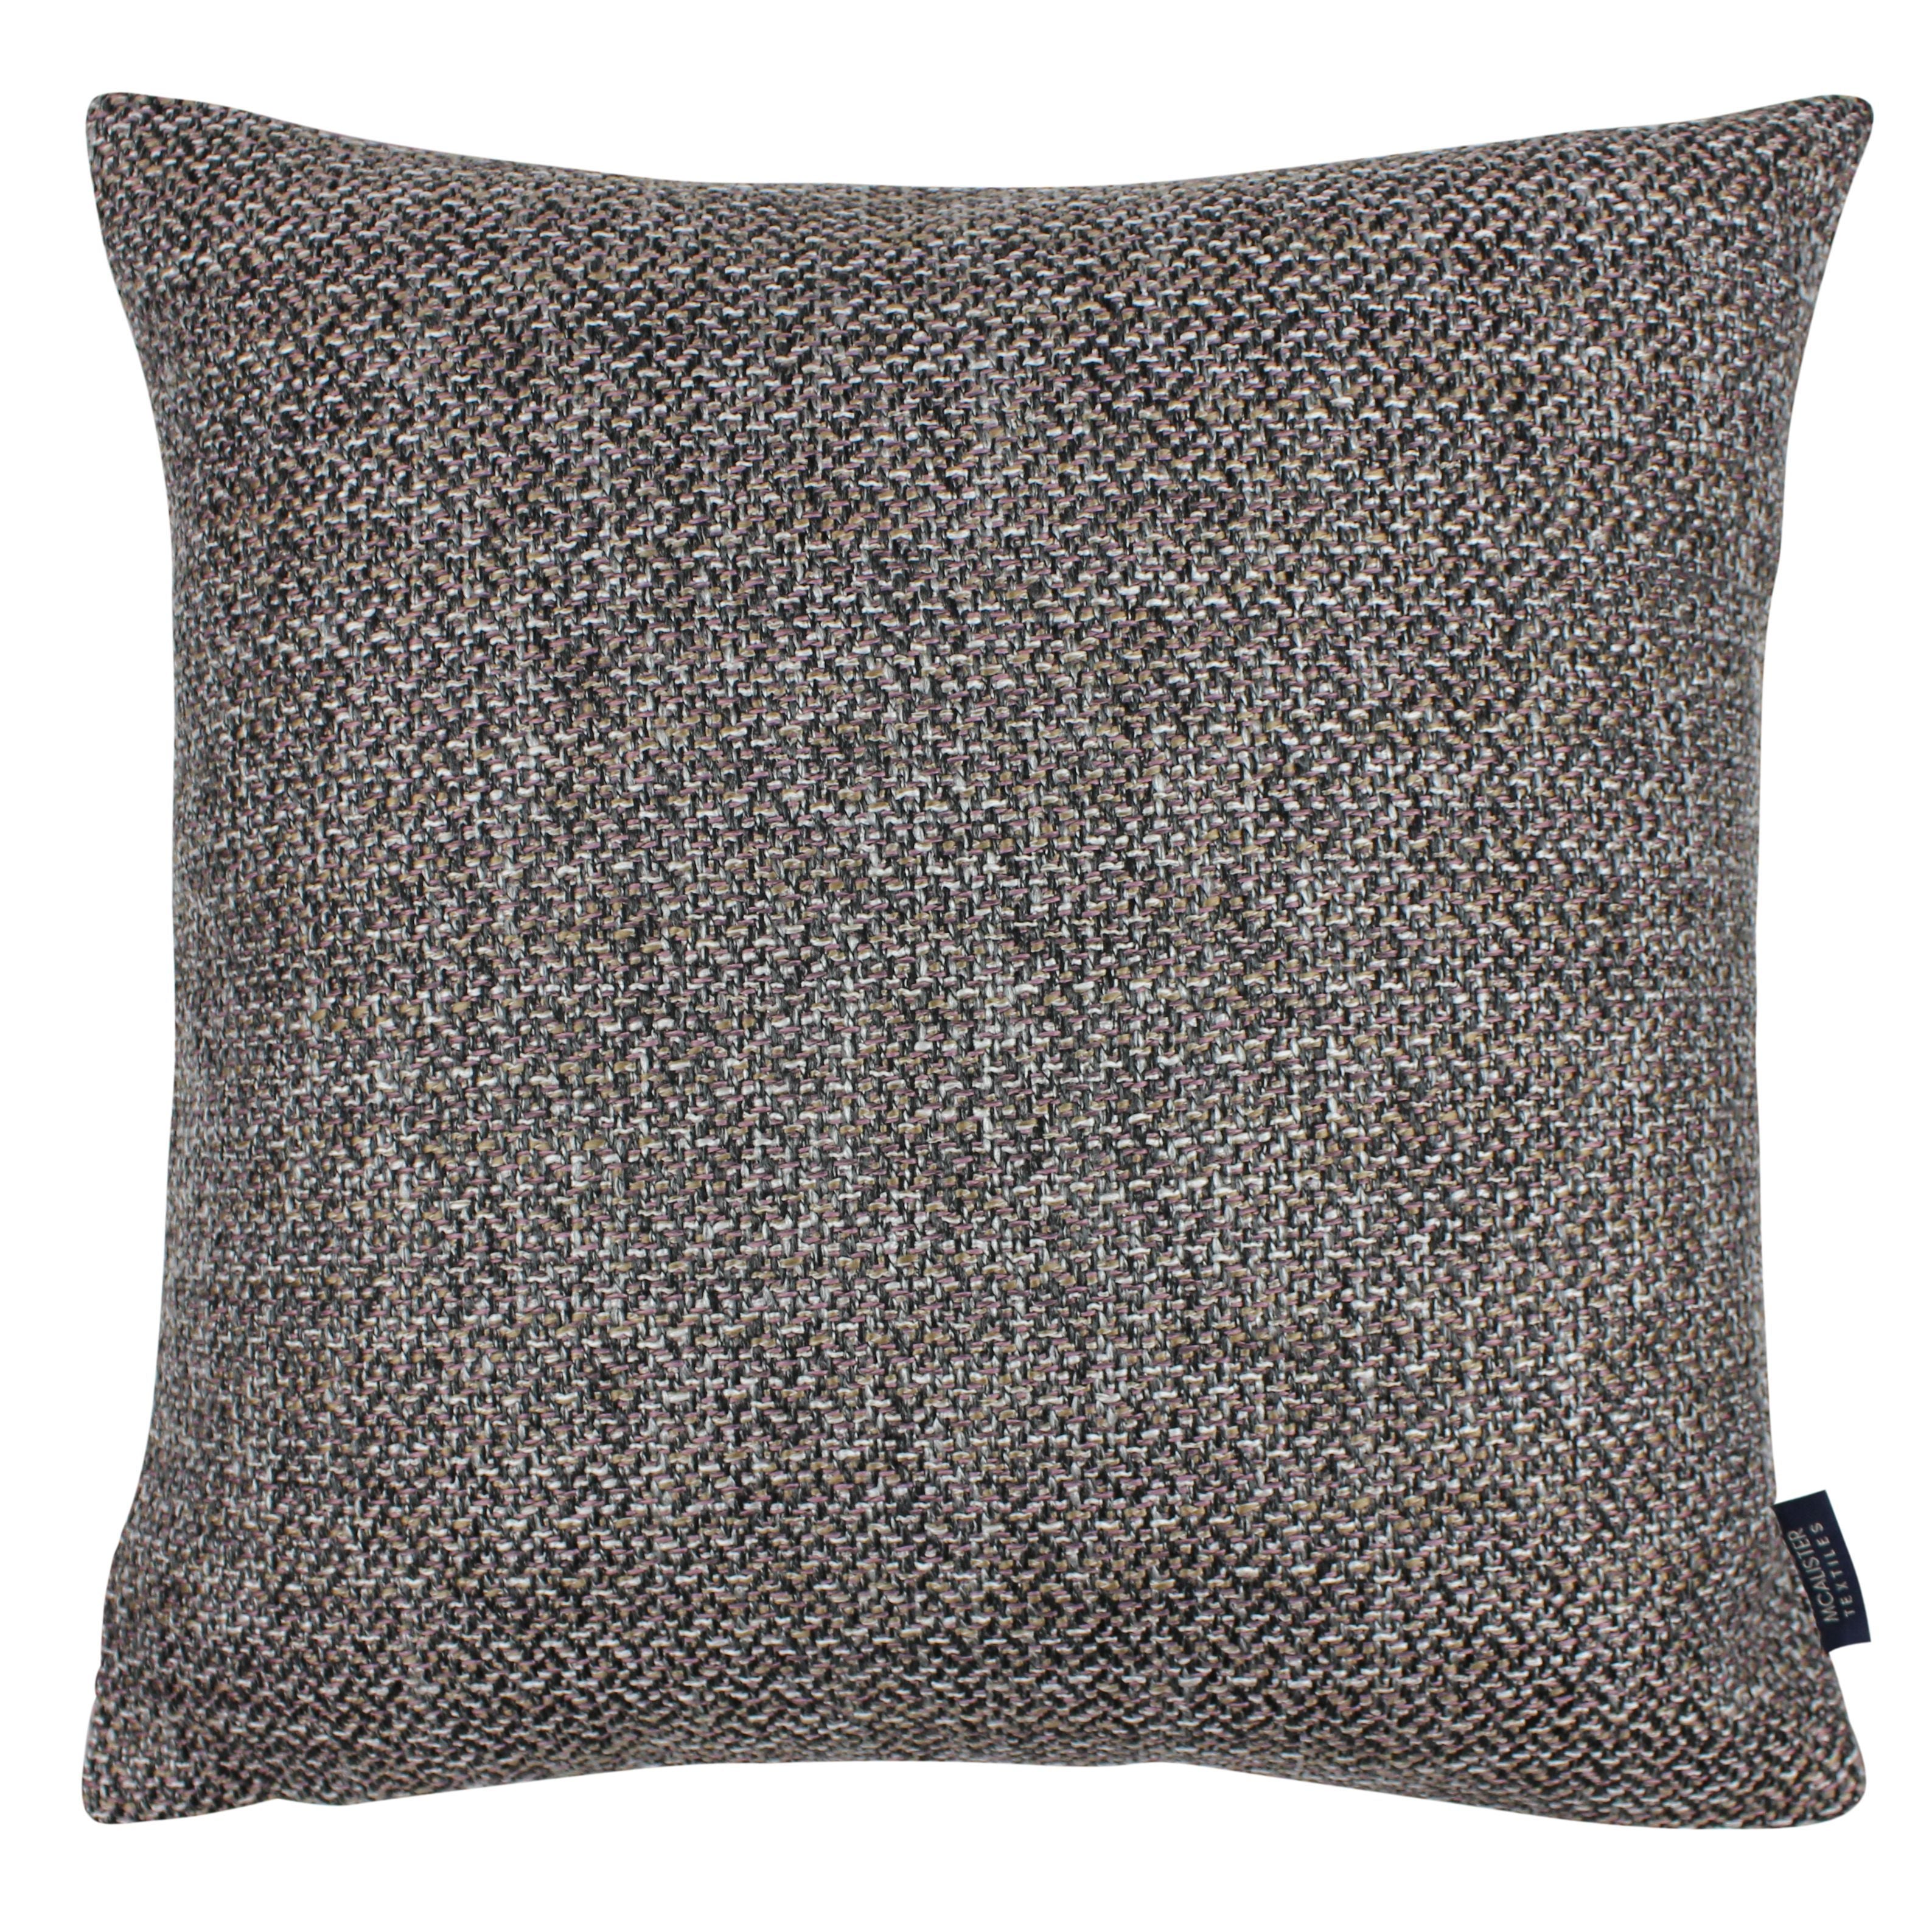 McAlister Textiles Lewis Tweed Cushion Grey Heather and Charcoal Cushions and Covers Cover Only 43cm x 43cm 